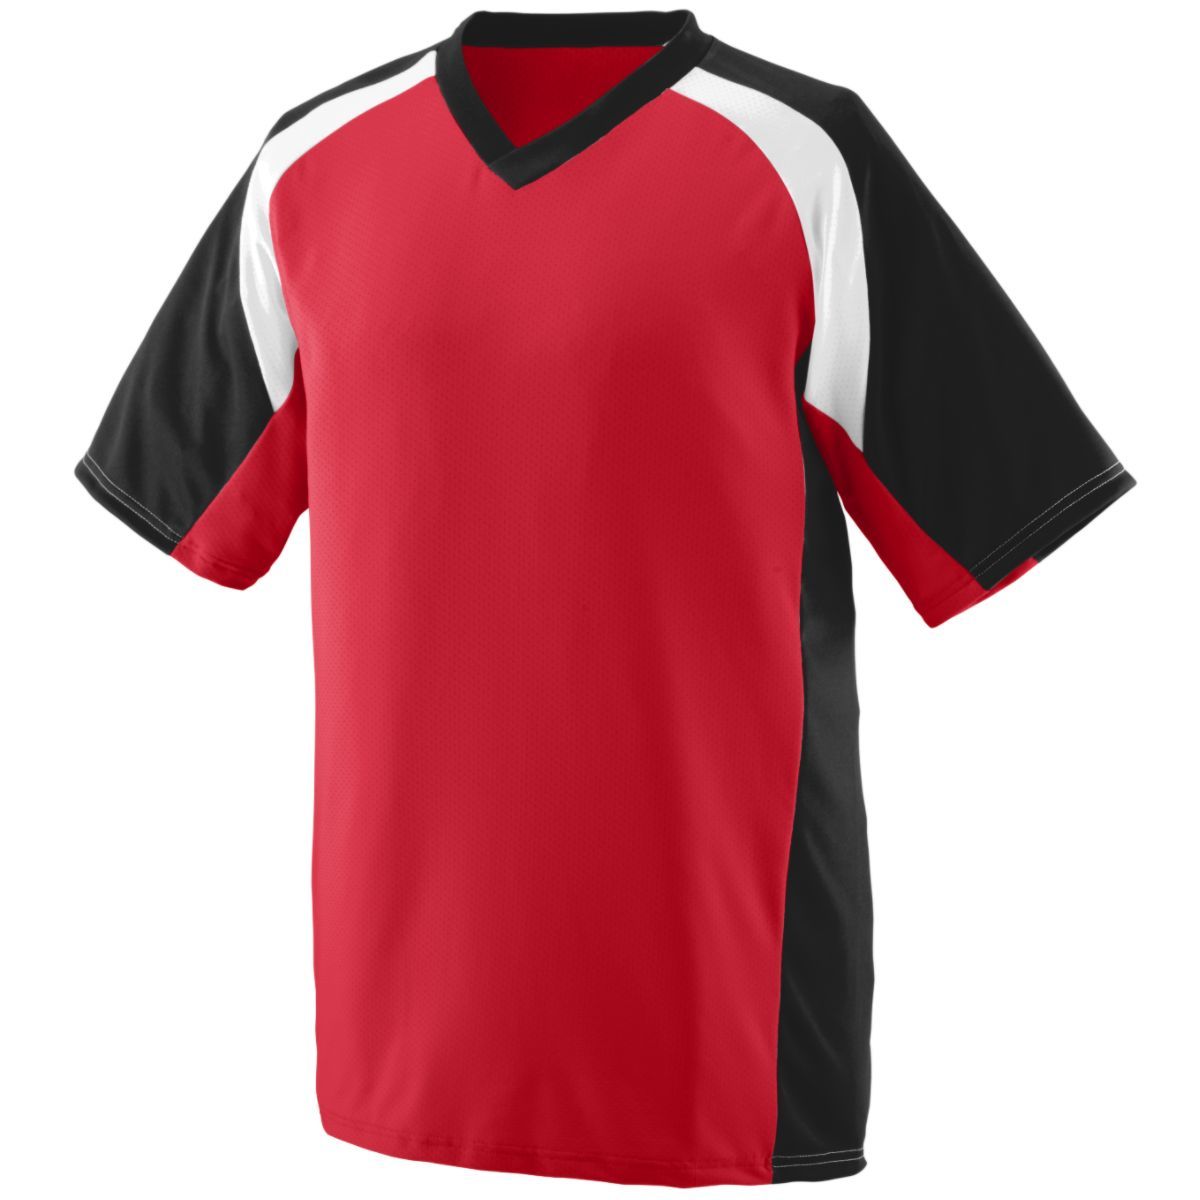 Augusta Sportswear Youth Nitro Jersey in Red/Black/White  -Part of the Youth, Youth-Jersey, Augusta-Products, Football, Shirts, All-Sports, All-Sports-1 product lines at KanaleyCreations.com